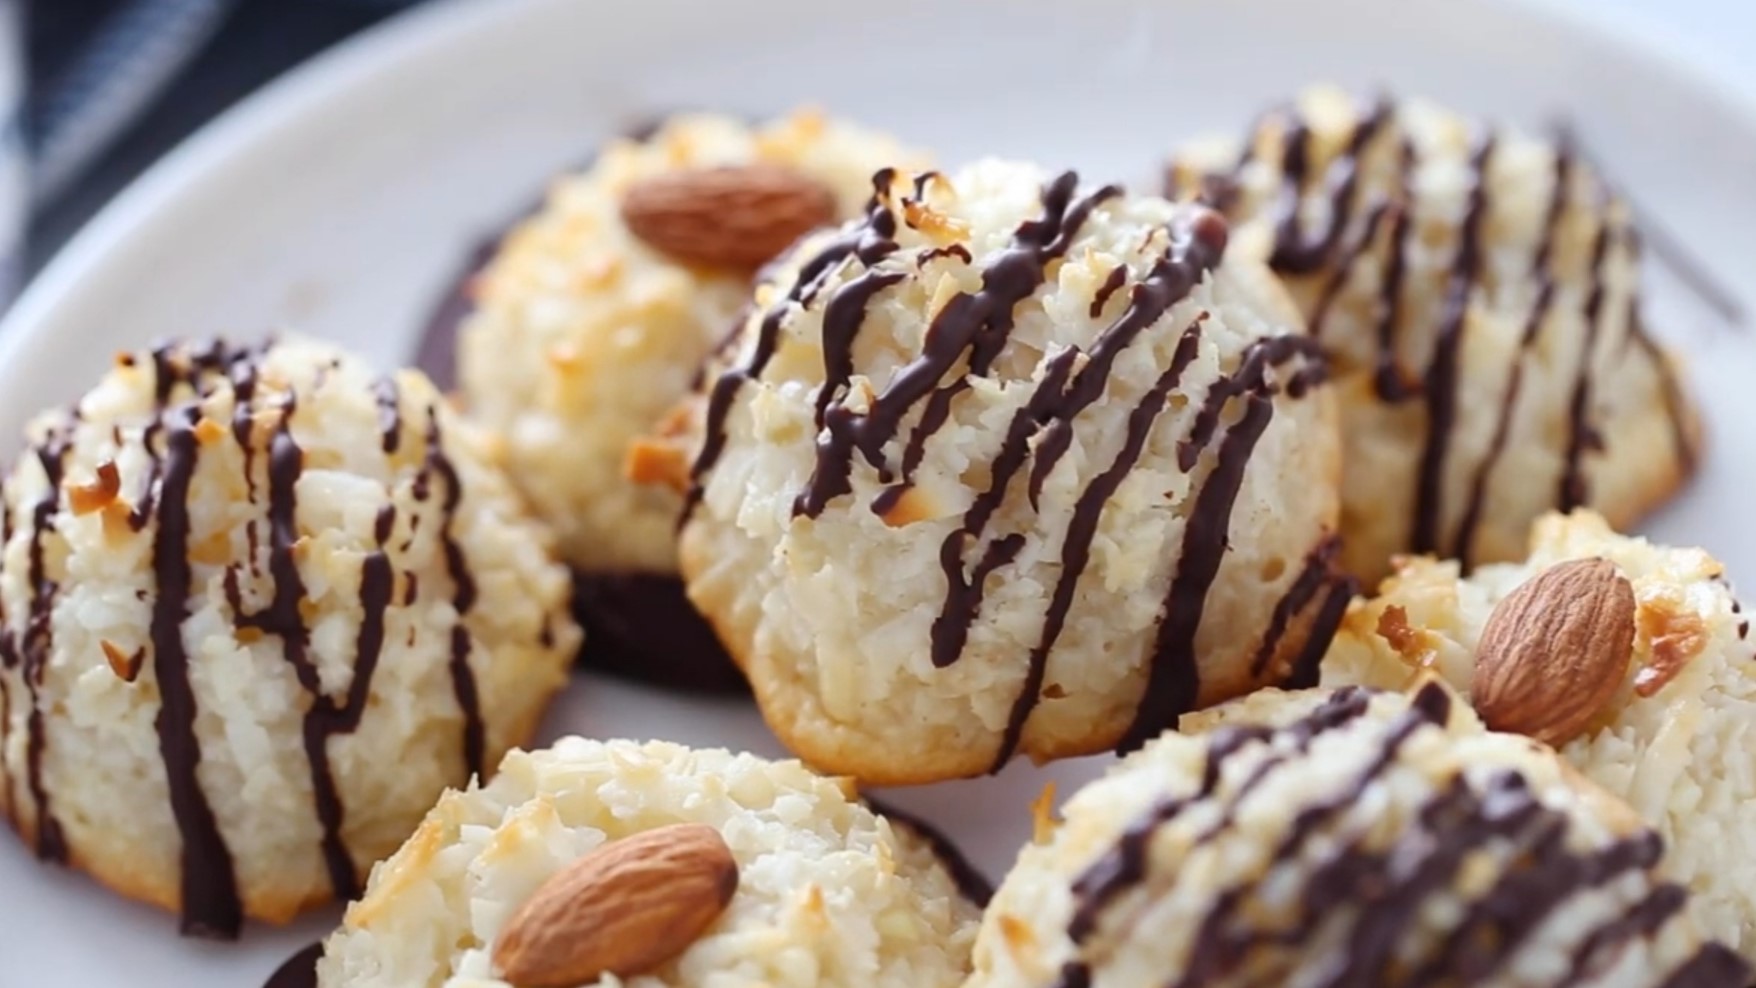 How To Make Coconut Almond Macaroons Recipe - Recipes.net